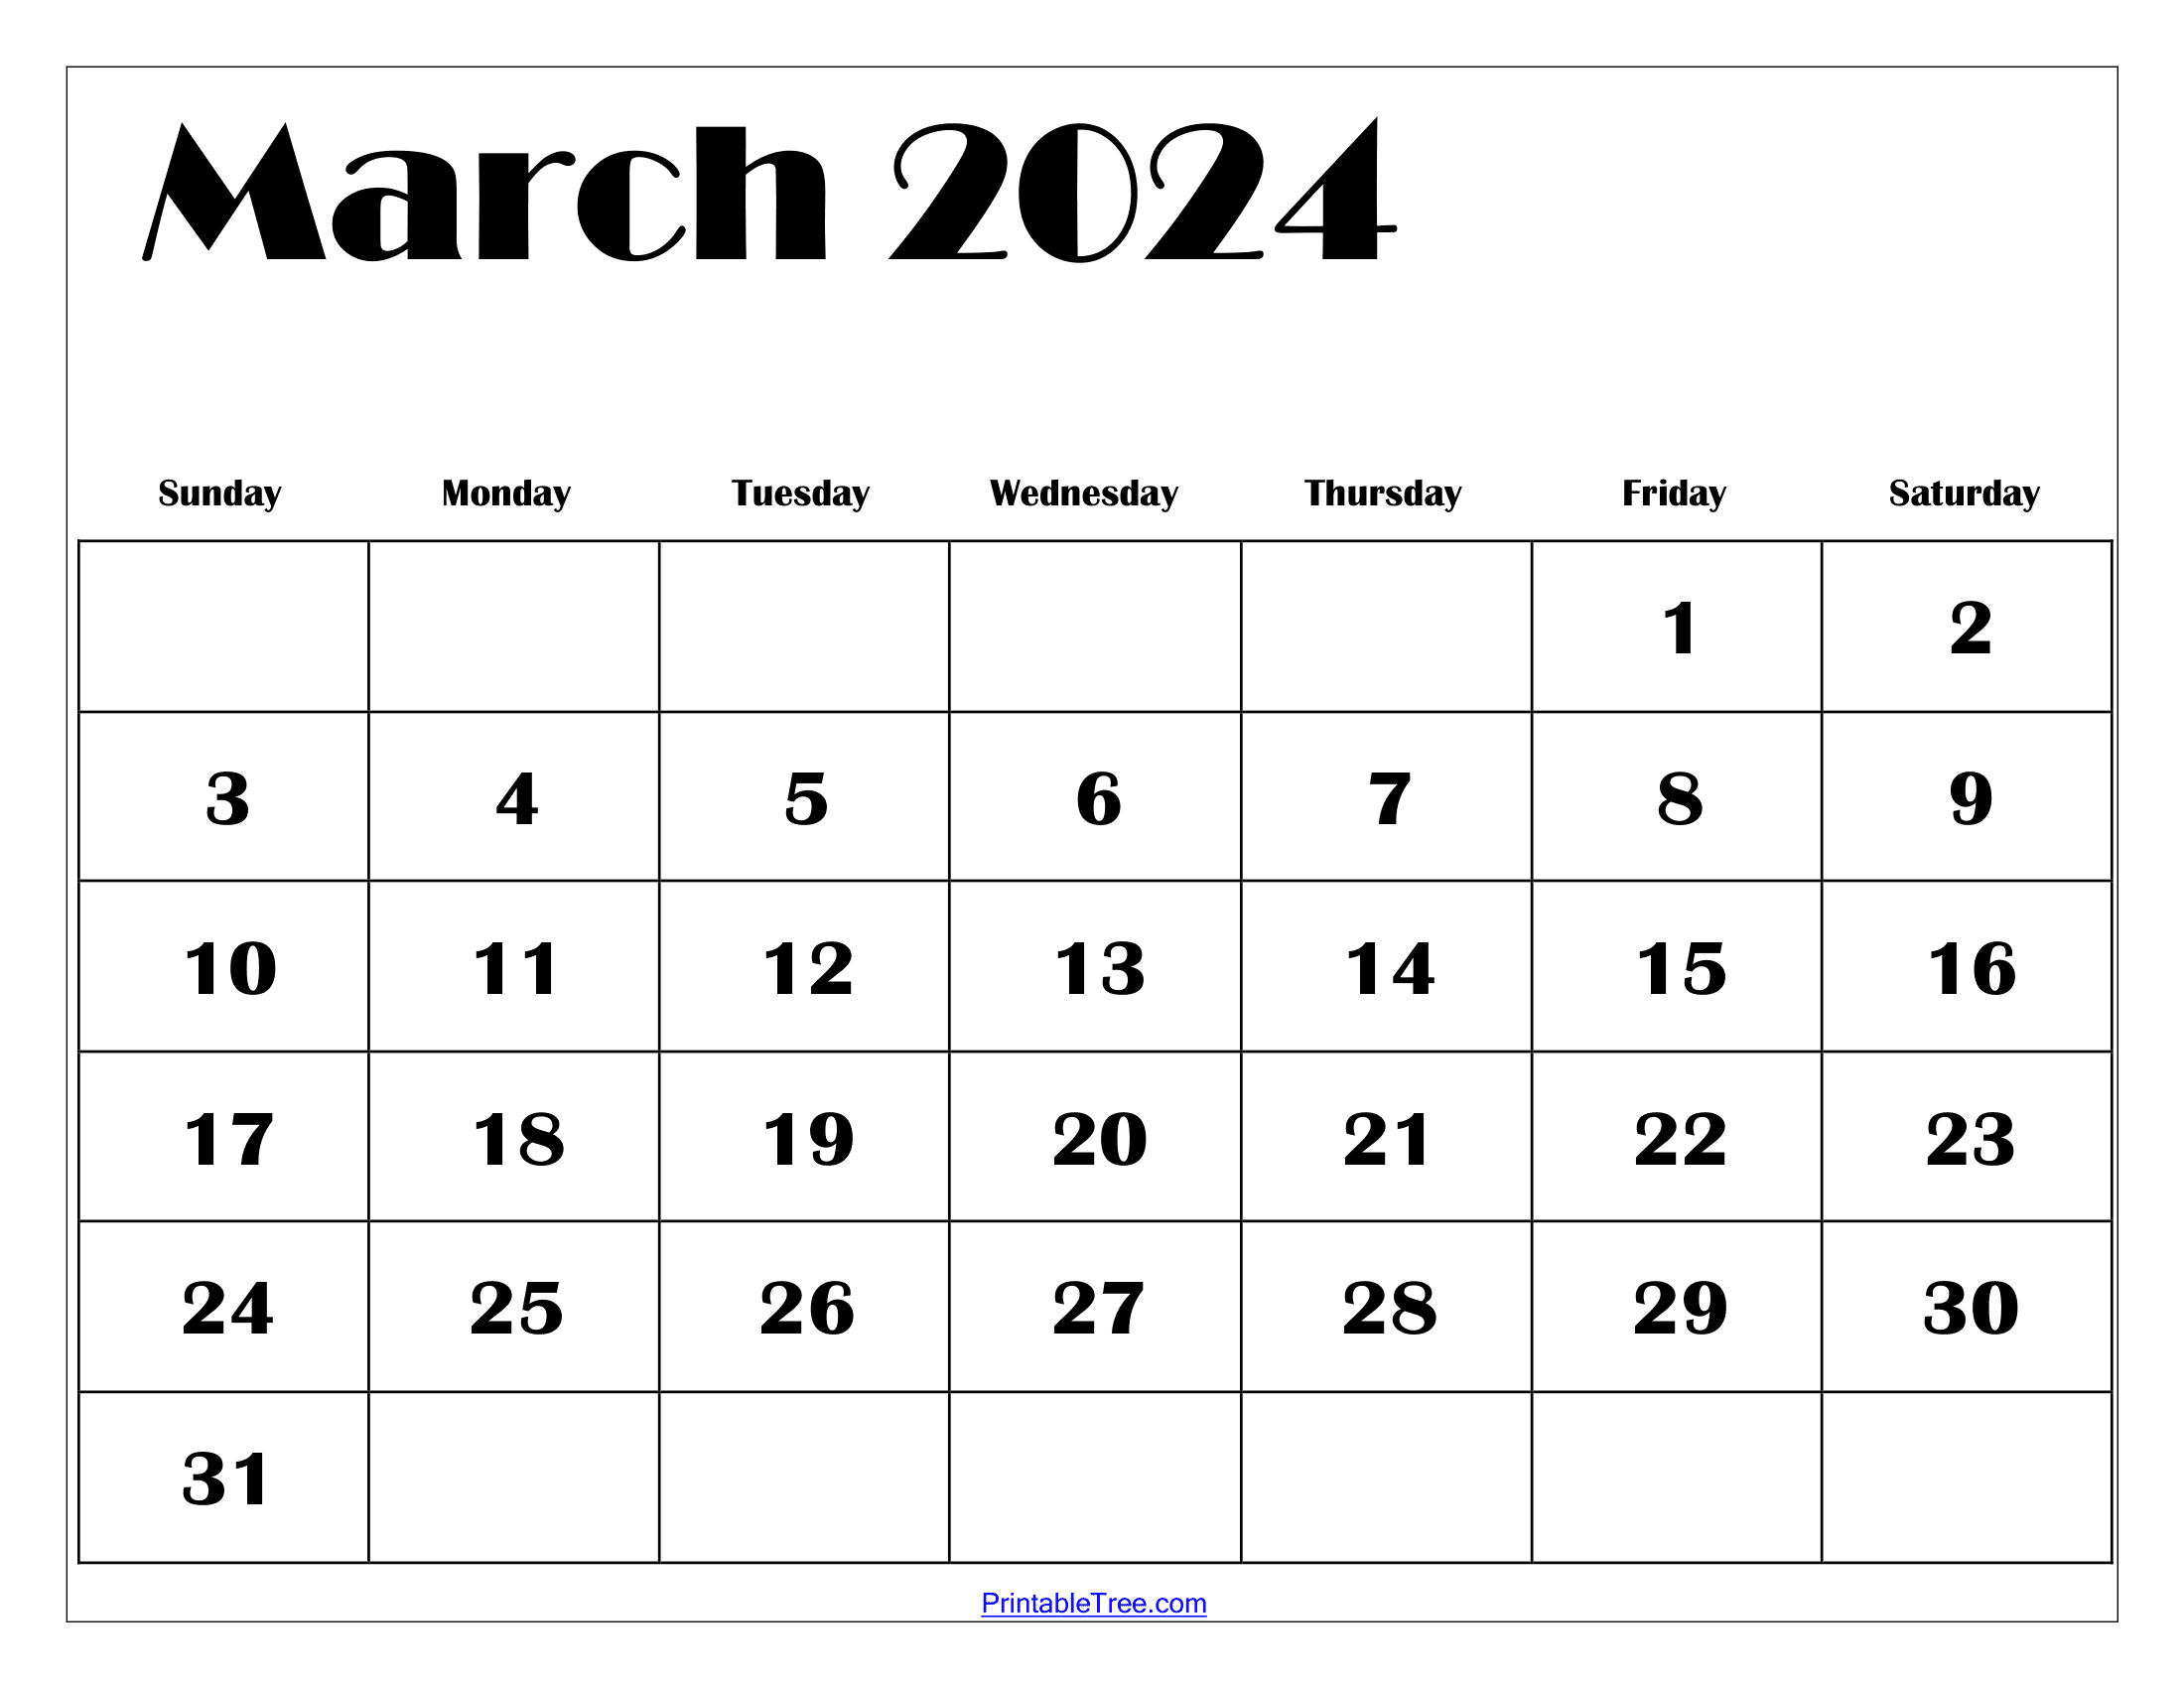 March 2024 Calendar Printable Pdf With Holidays Template Free for Free March 2024 Calendar Printable